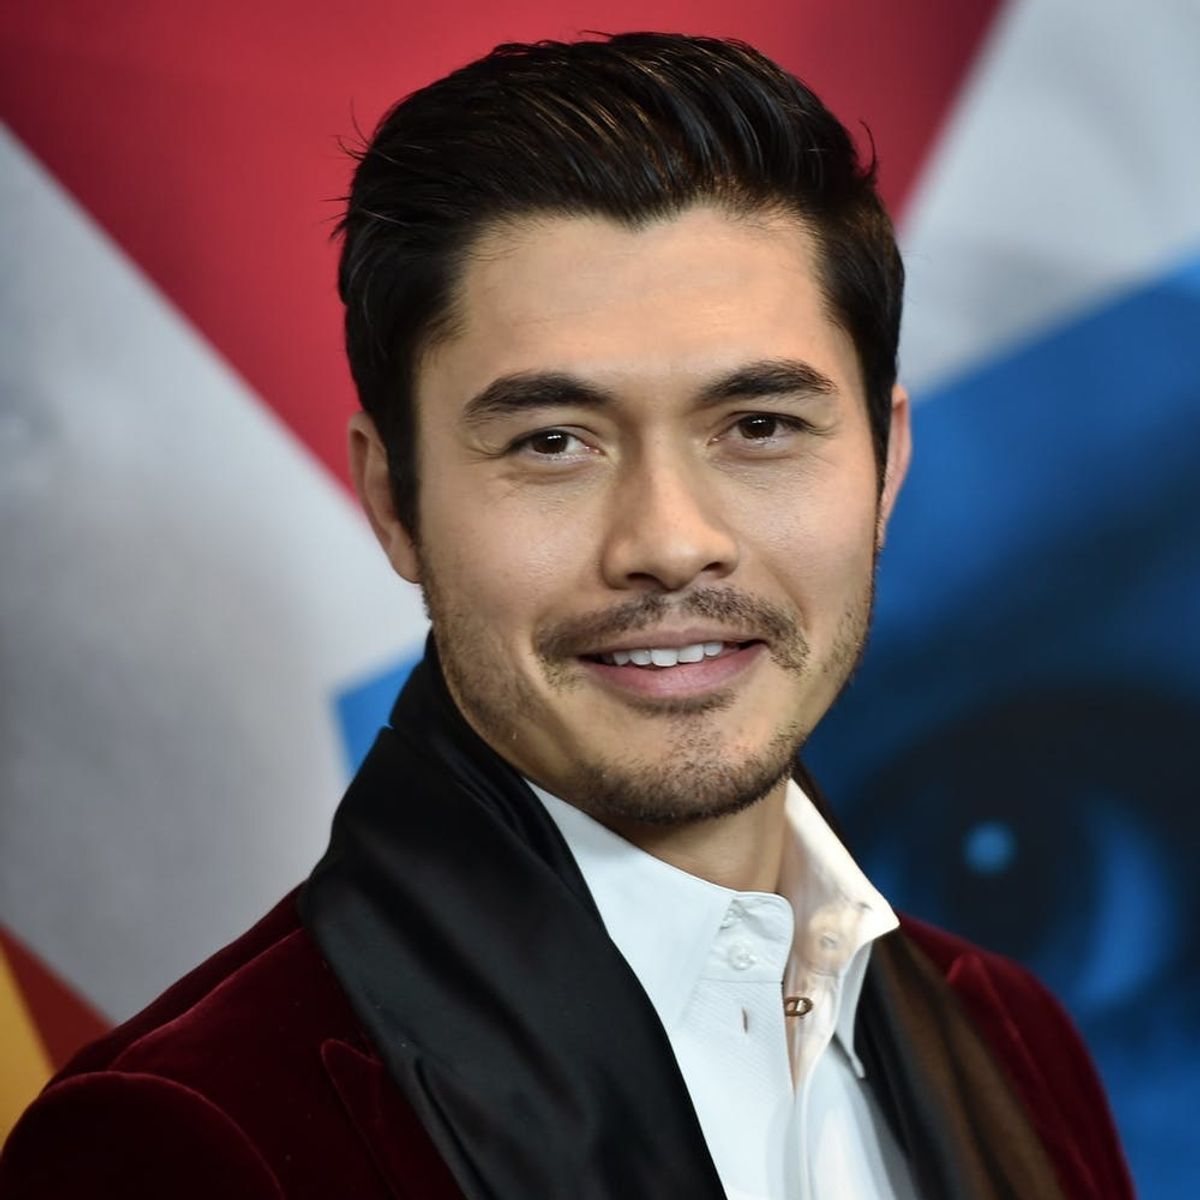 A Simple Favor’s Henry Golding Says People Might Be Surprised to Learn This About Him